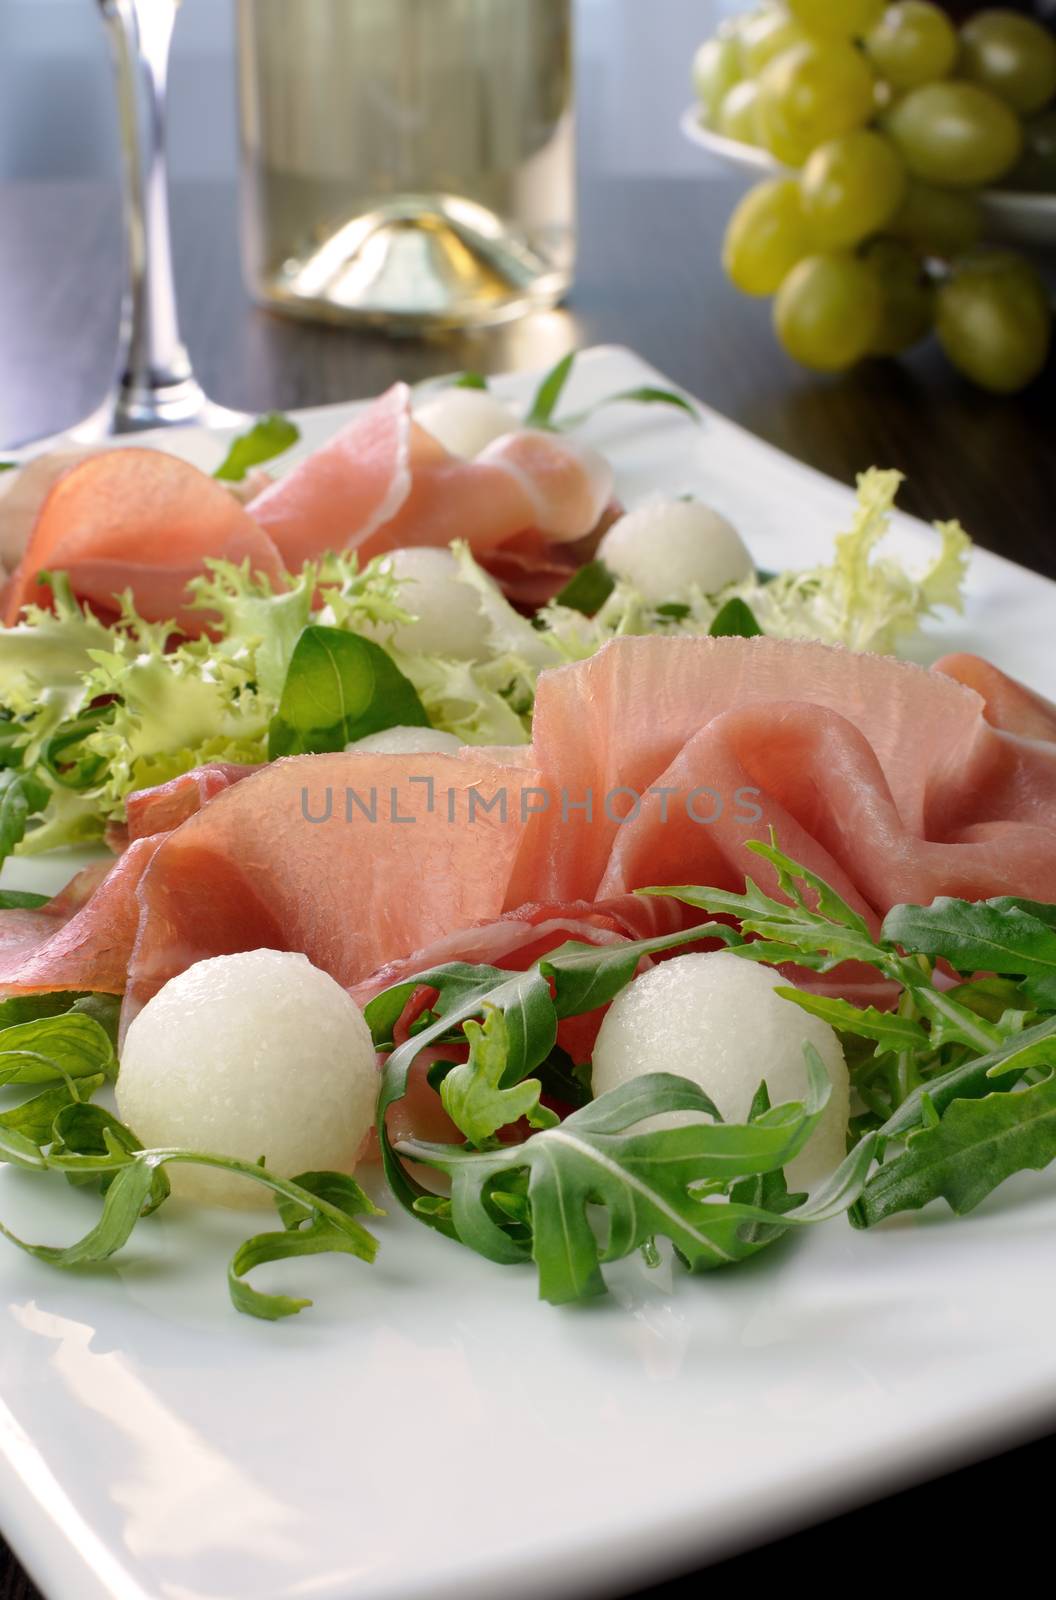 Arugula salad with ham and melon by Apolonia